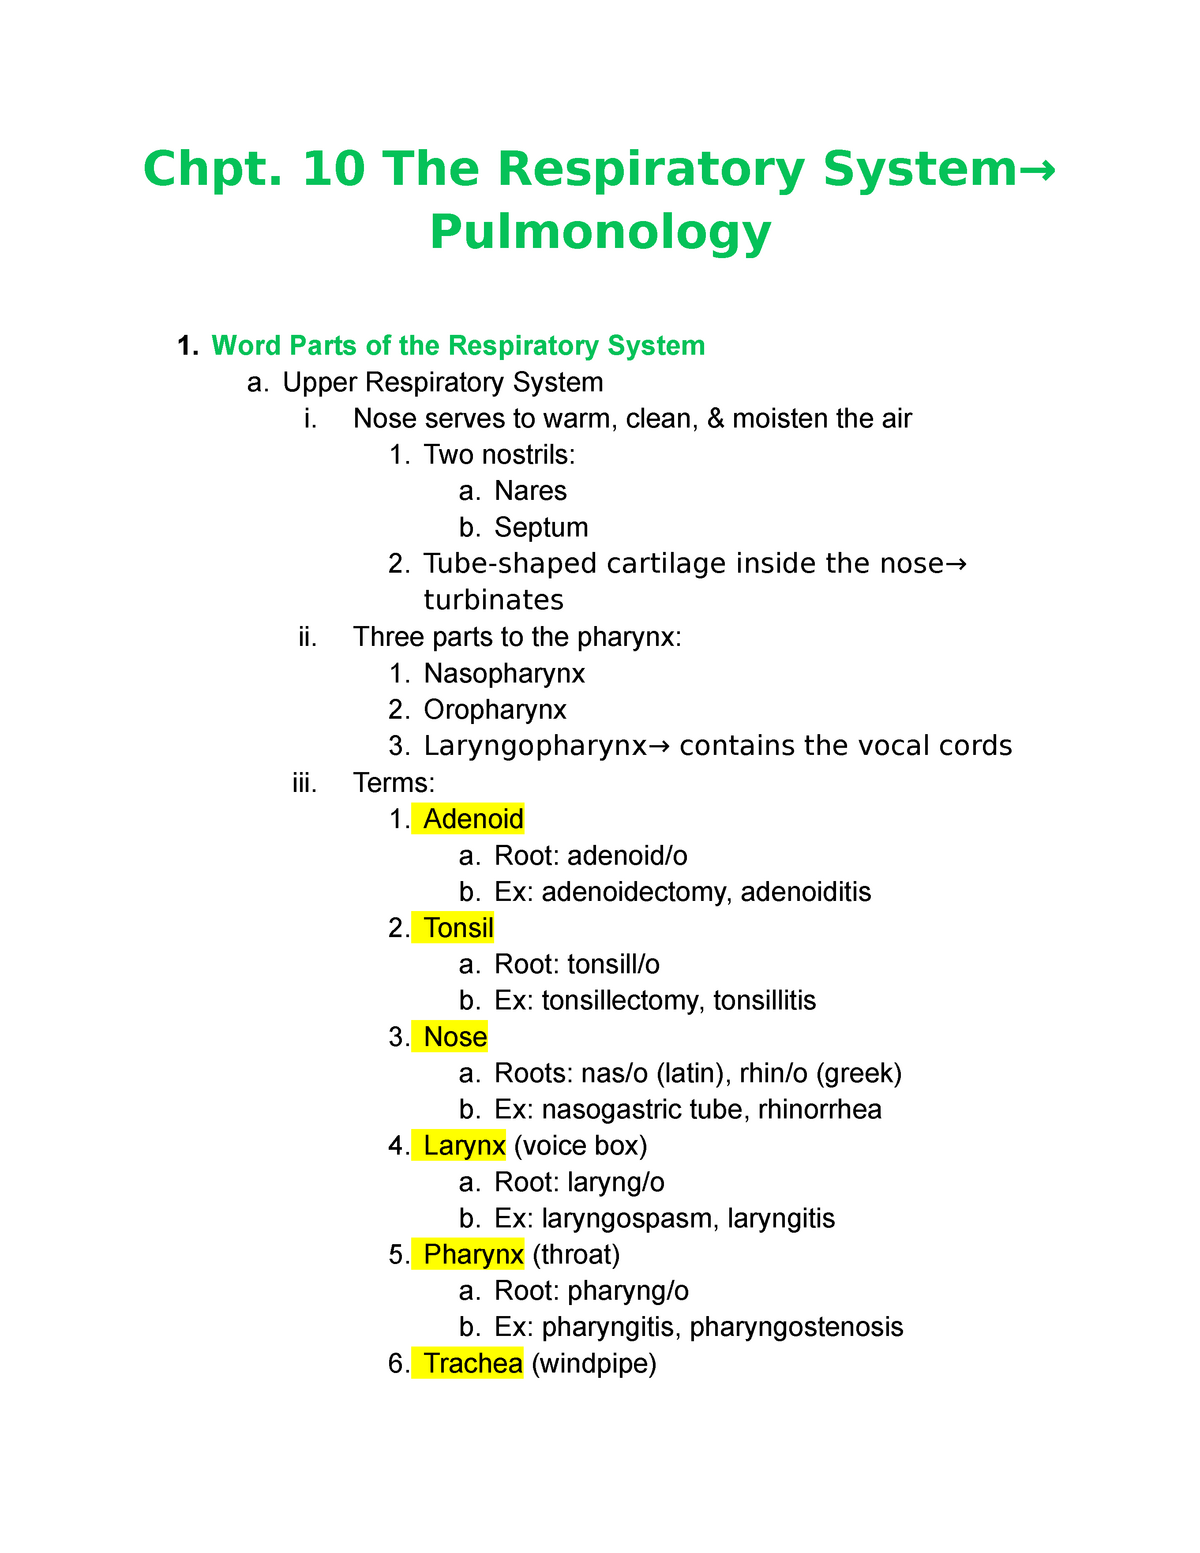 Medical Terminologies Chpt 10 Notes Chpt 10 The Respiratory System→